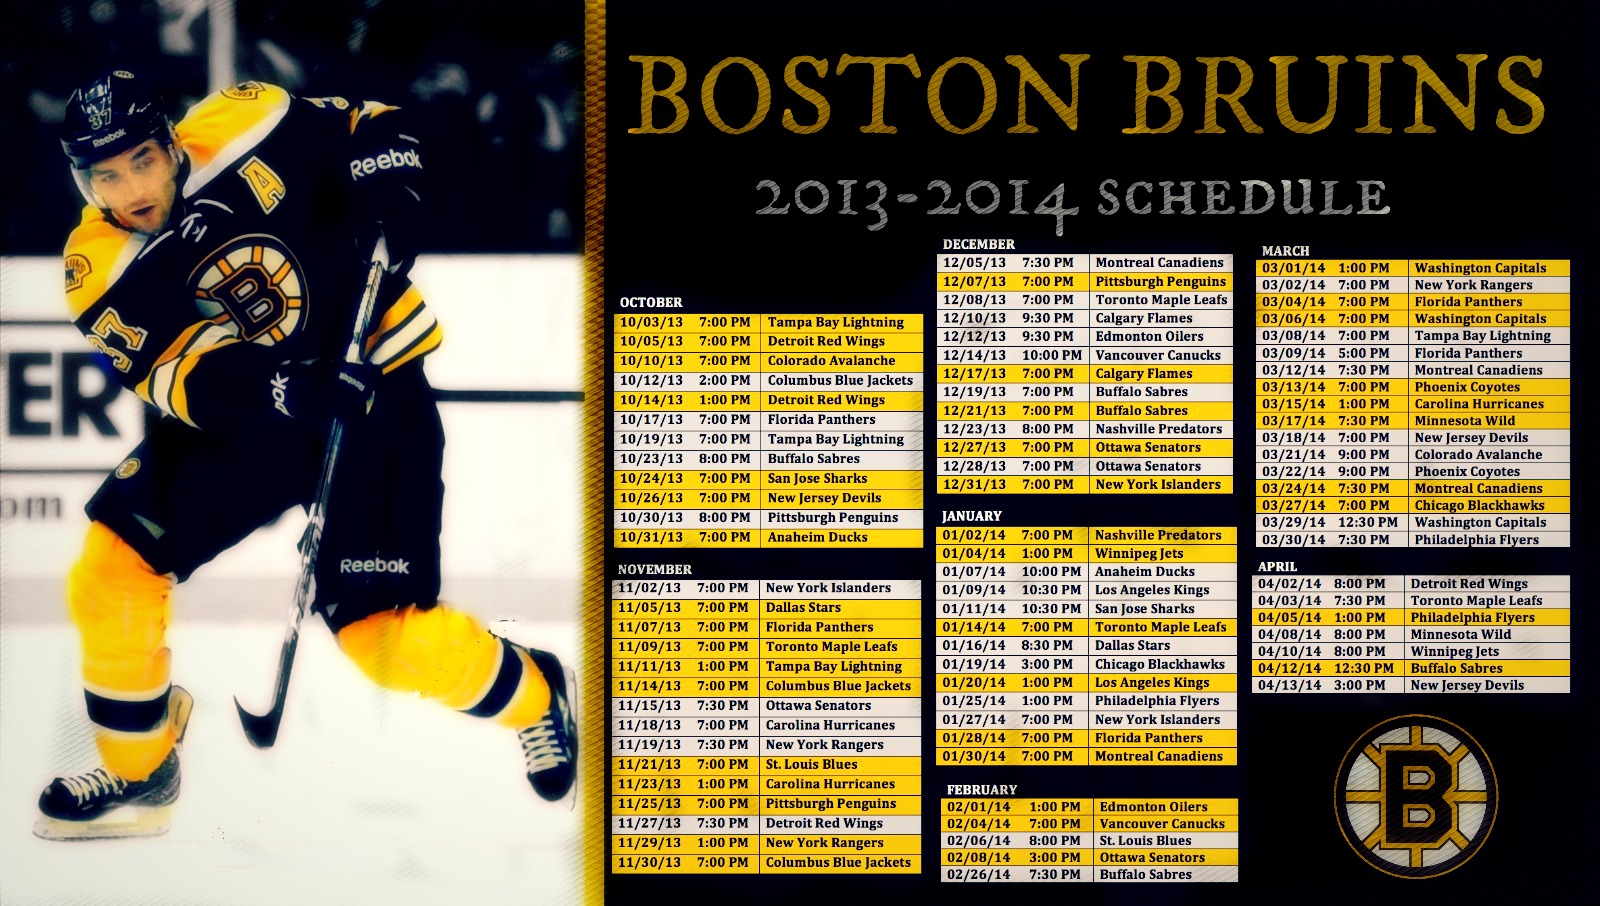 Boston Bruins Schedule Printable Nhl Announces Schedule For Bruins